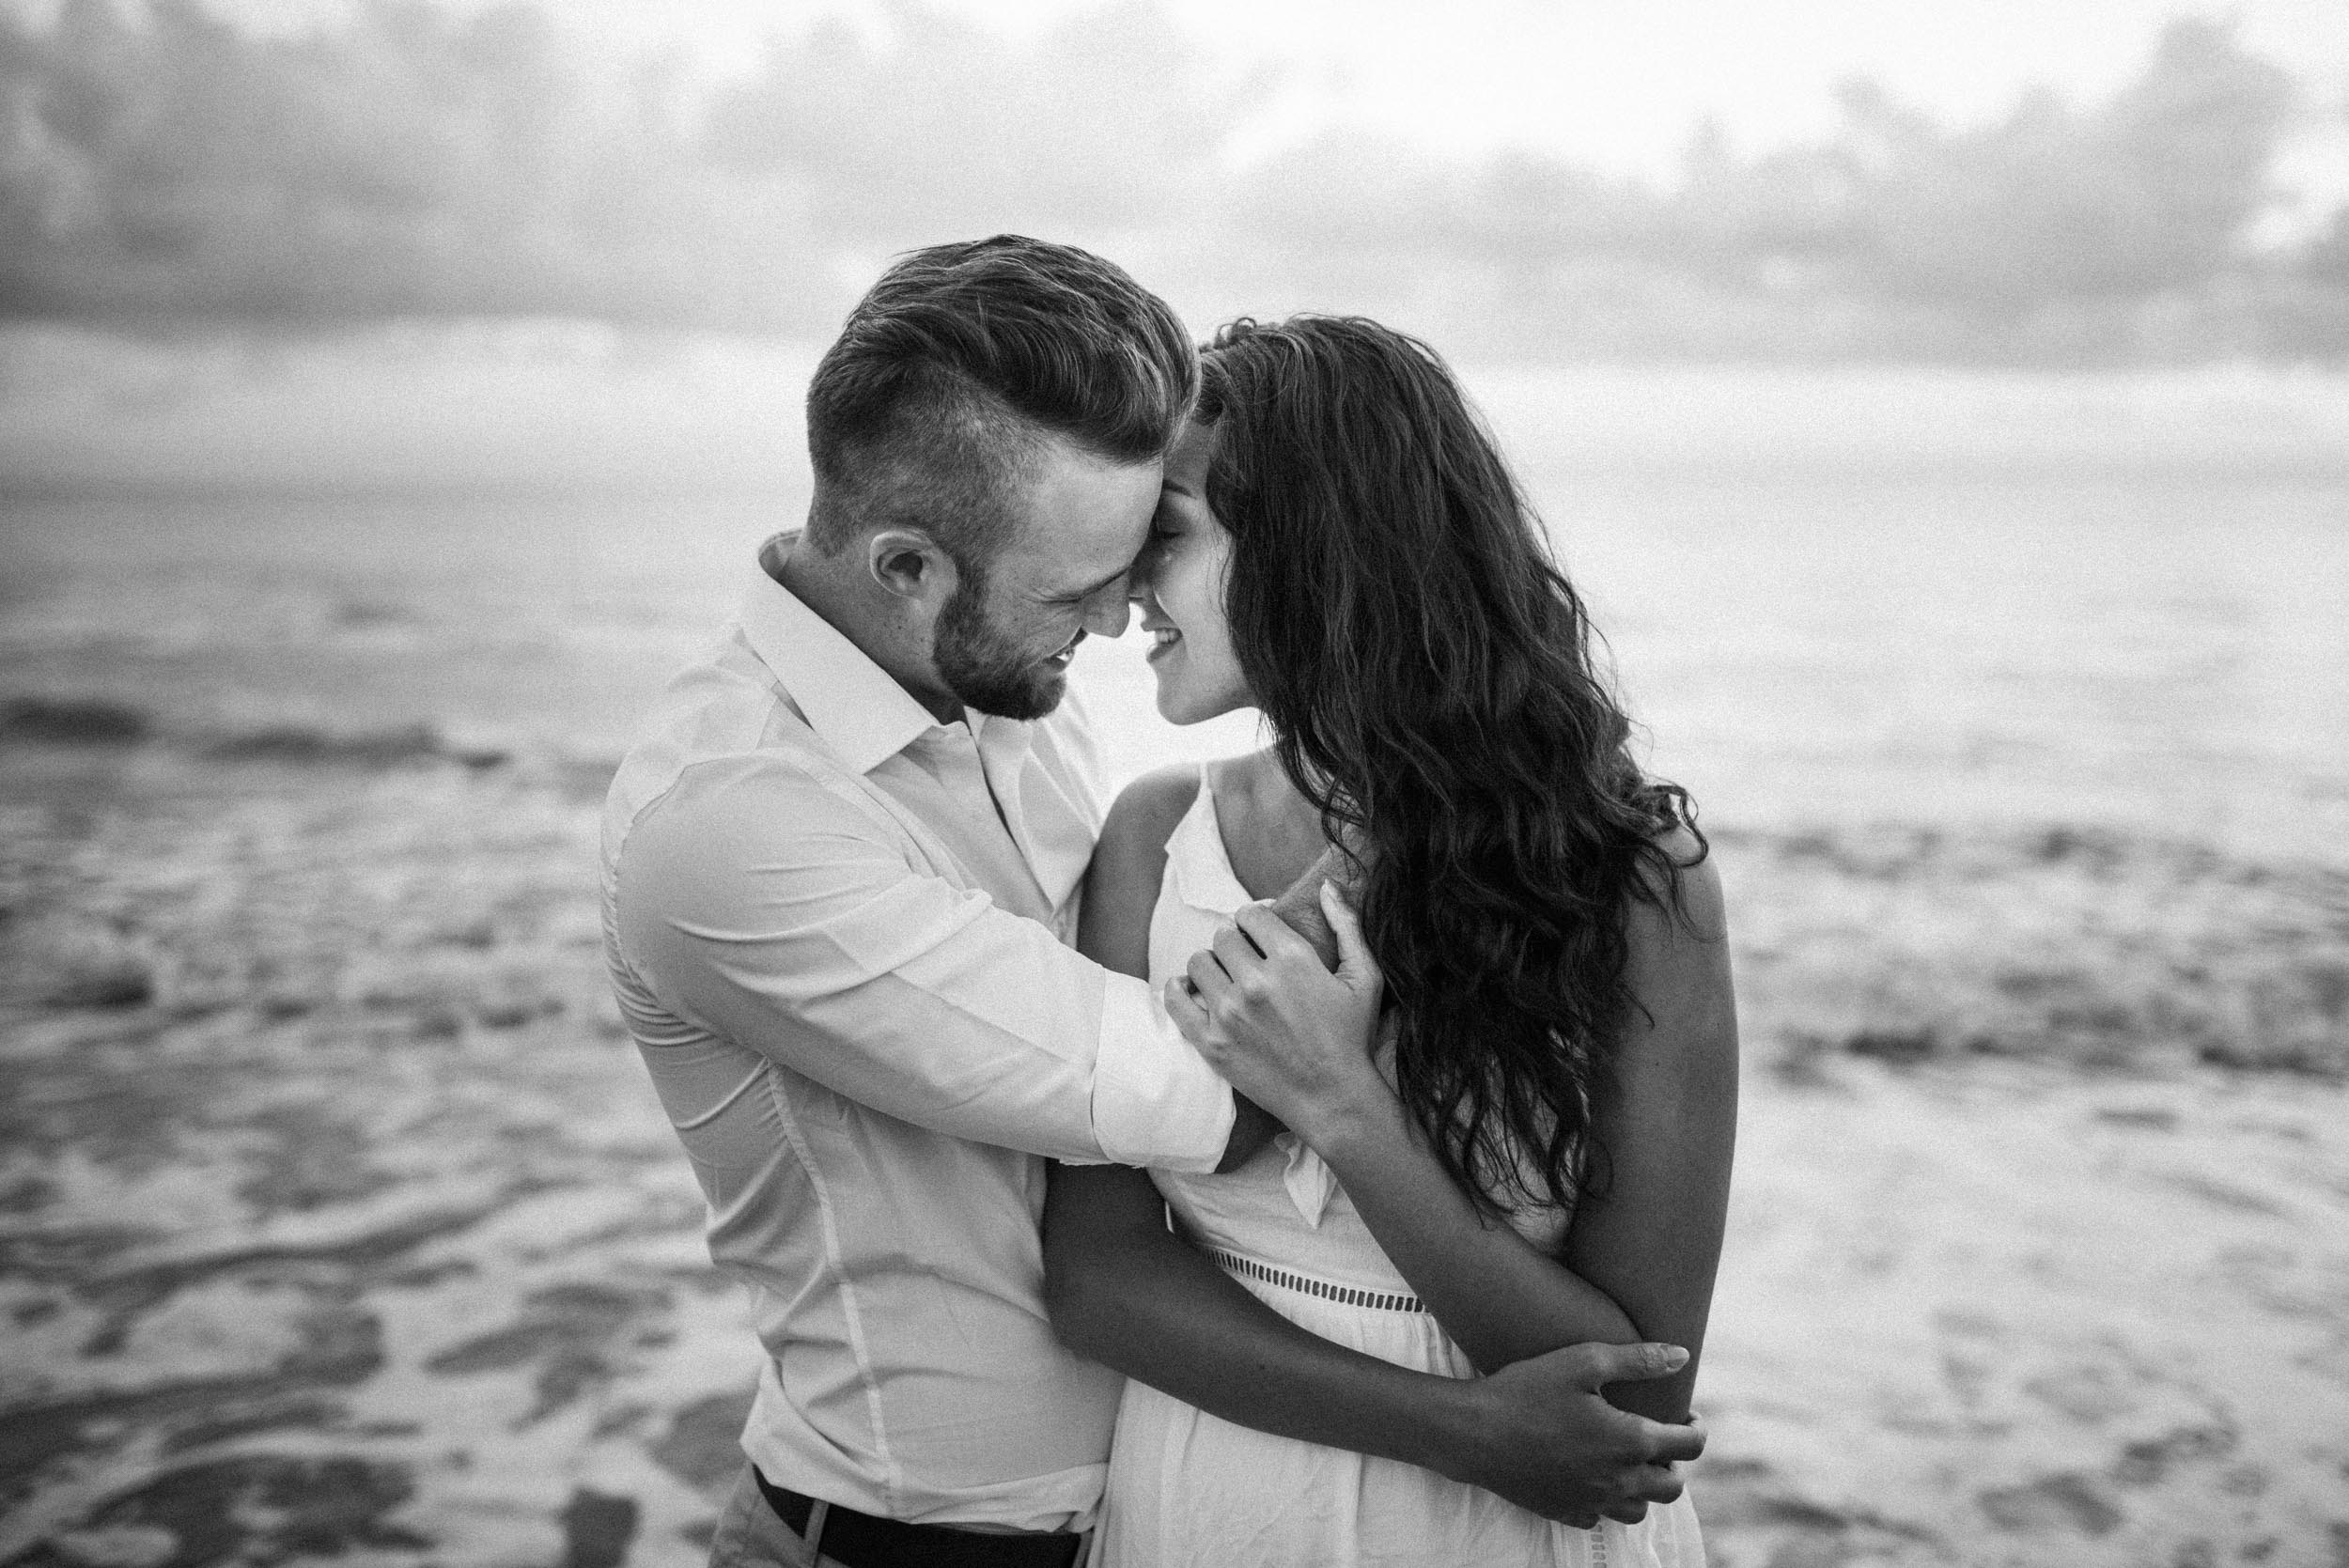 The Raw Photographer - Cairns Wedding Photographer - Engaged Engagement - Beach location - Candid Photography Queensland-10.jpg